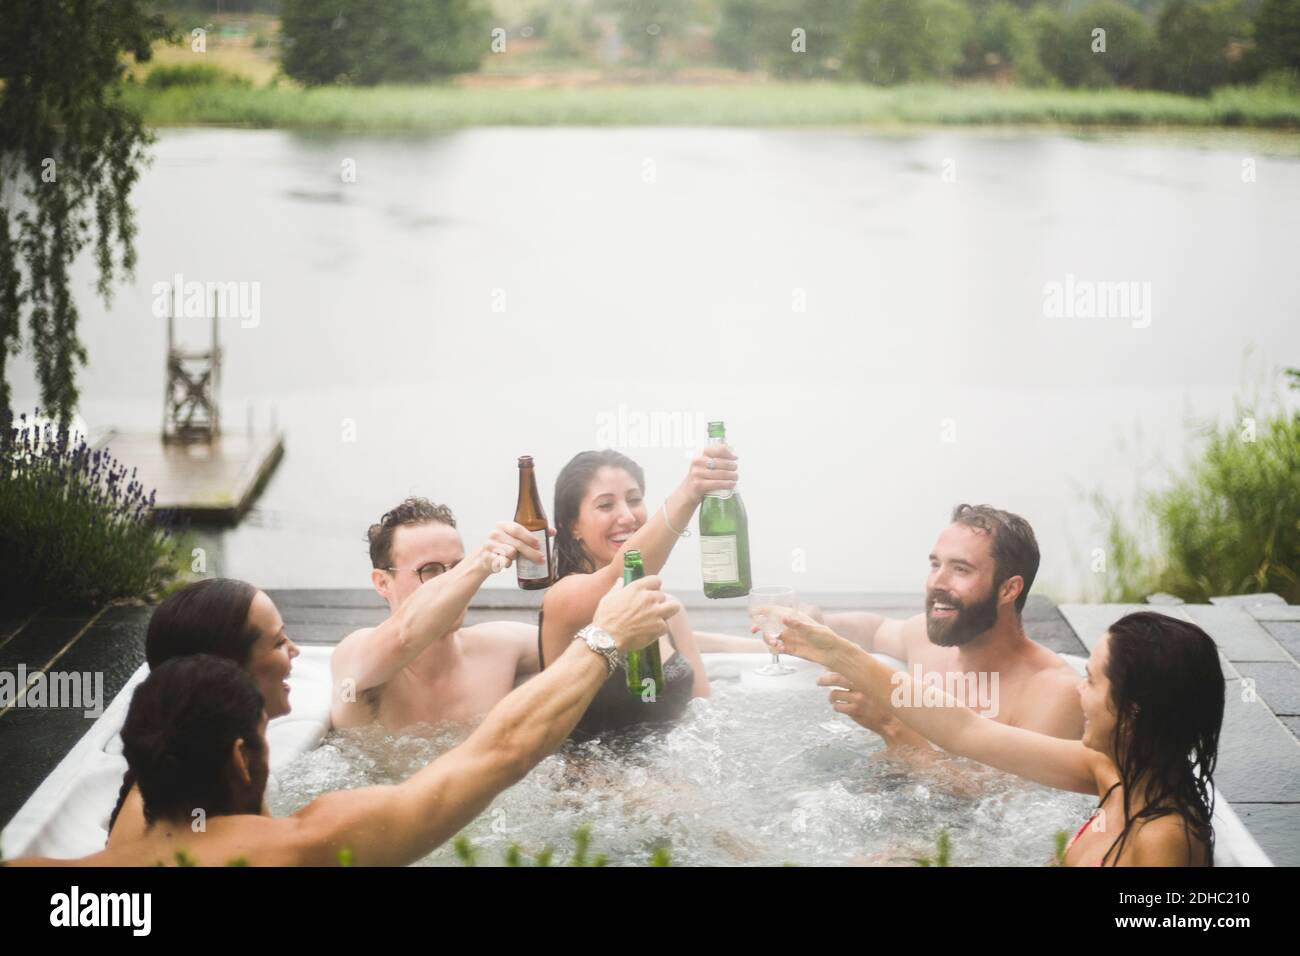 Carefree male and female friends enjoying drinks in hot tub against lake during weekend getaway Stock Photo